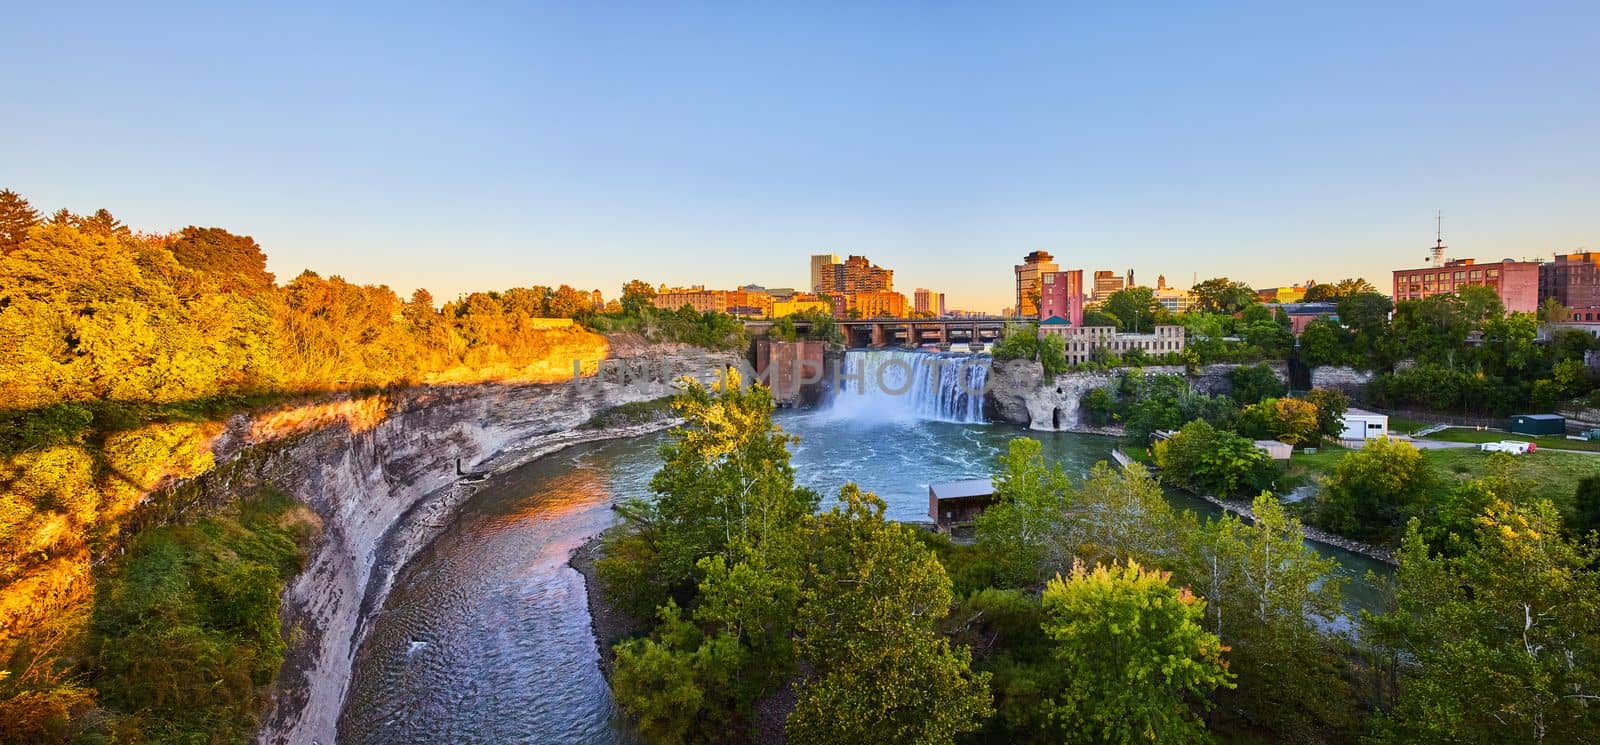 Image of Stunning waterfall at golden hour in city of Rochester New York with downtown in background